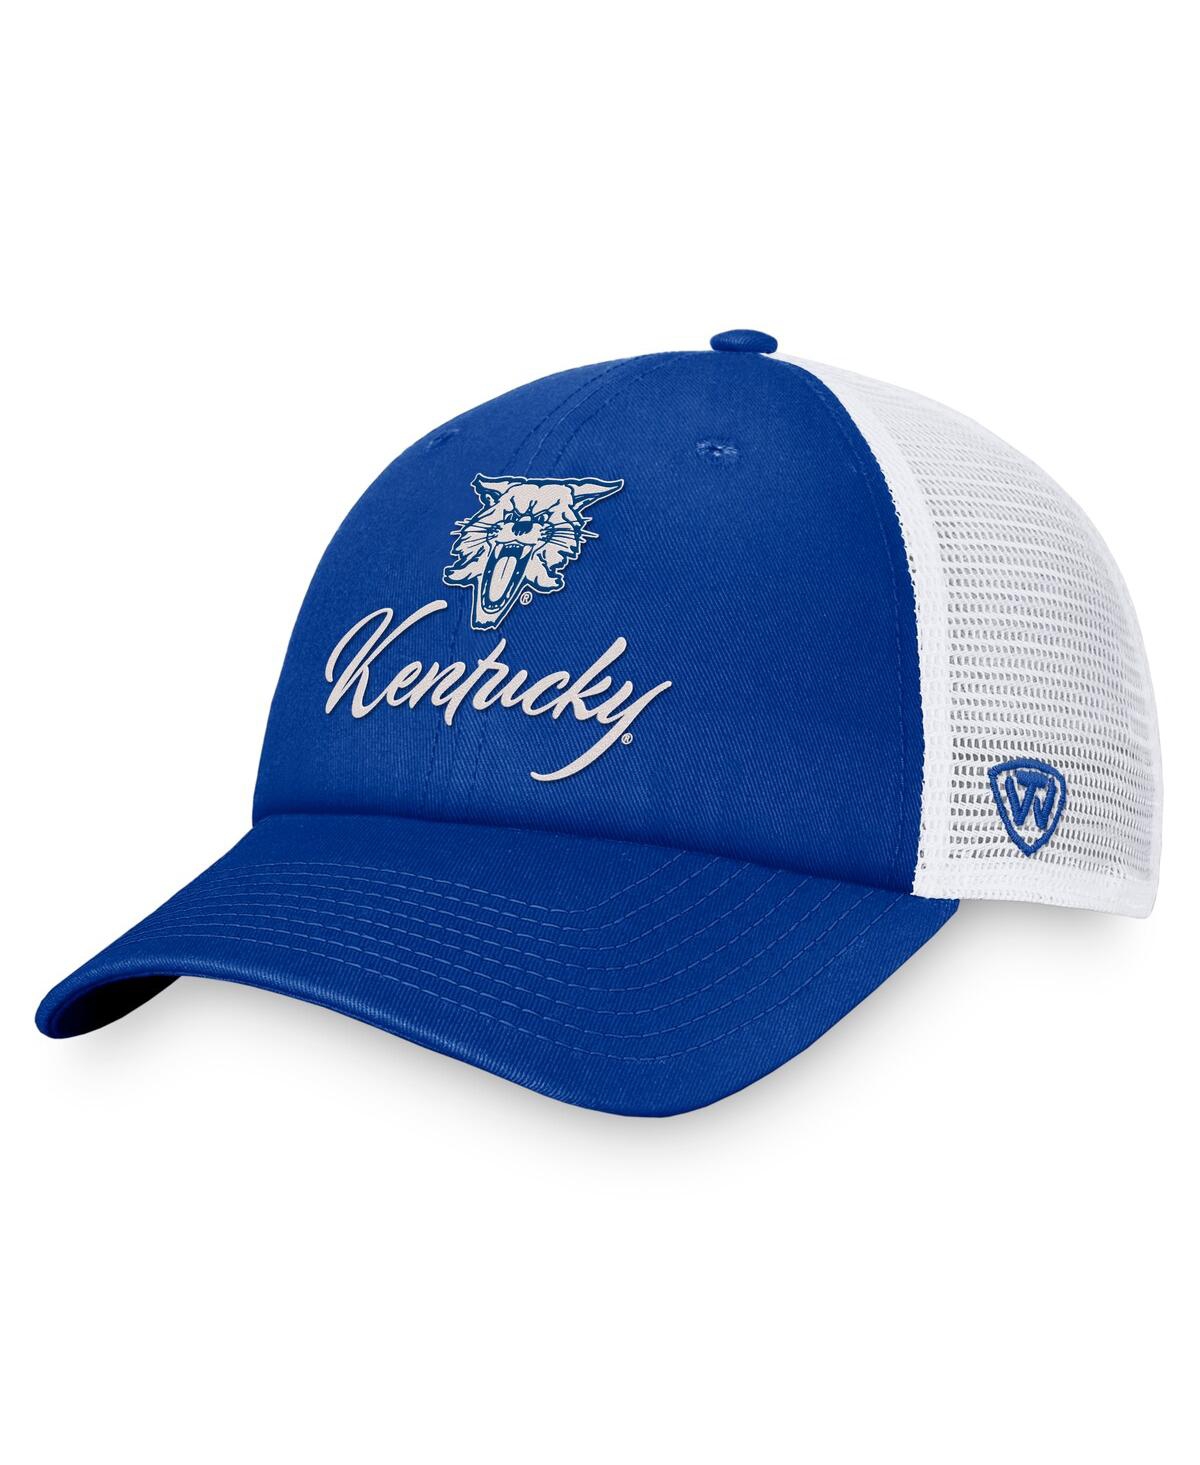 Top Of The World Women's  Royal, White Kentucky Wildcats Charm Trucker Adjustable Hat In Royal,white